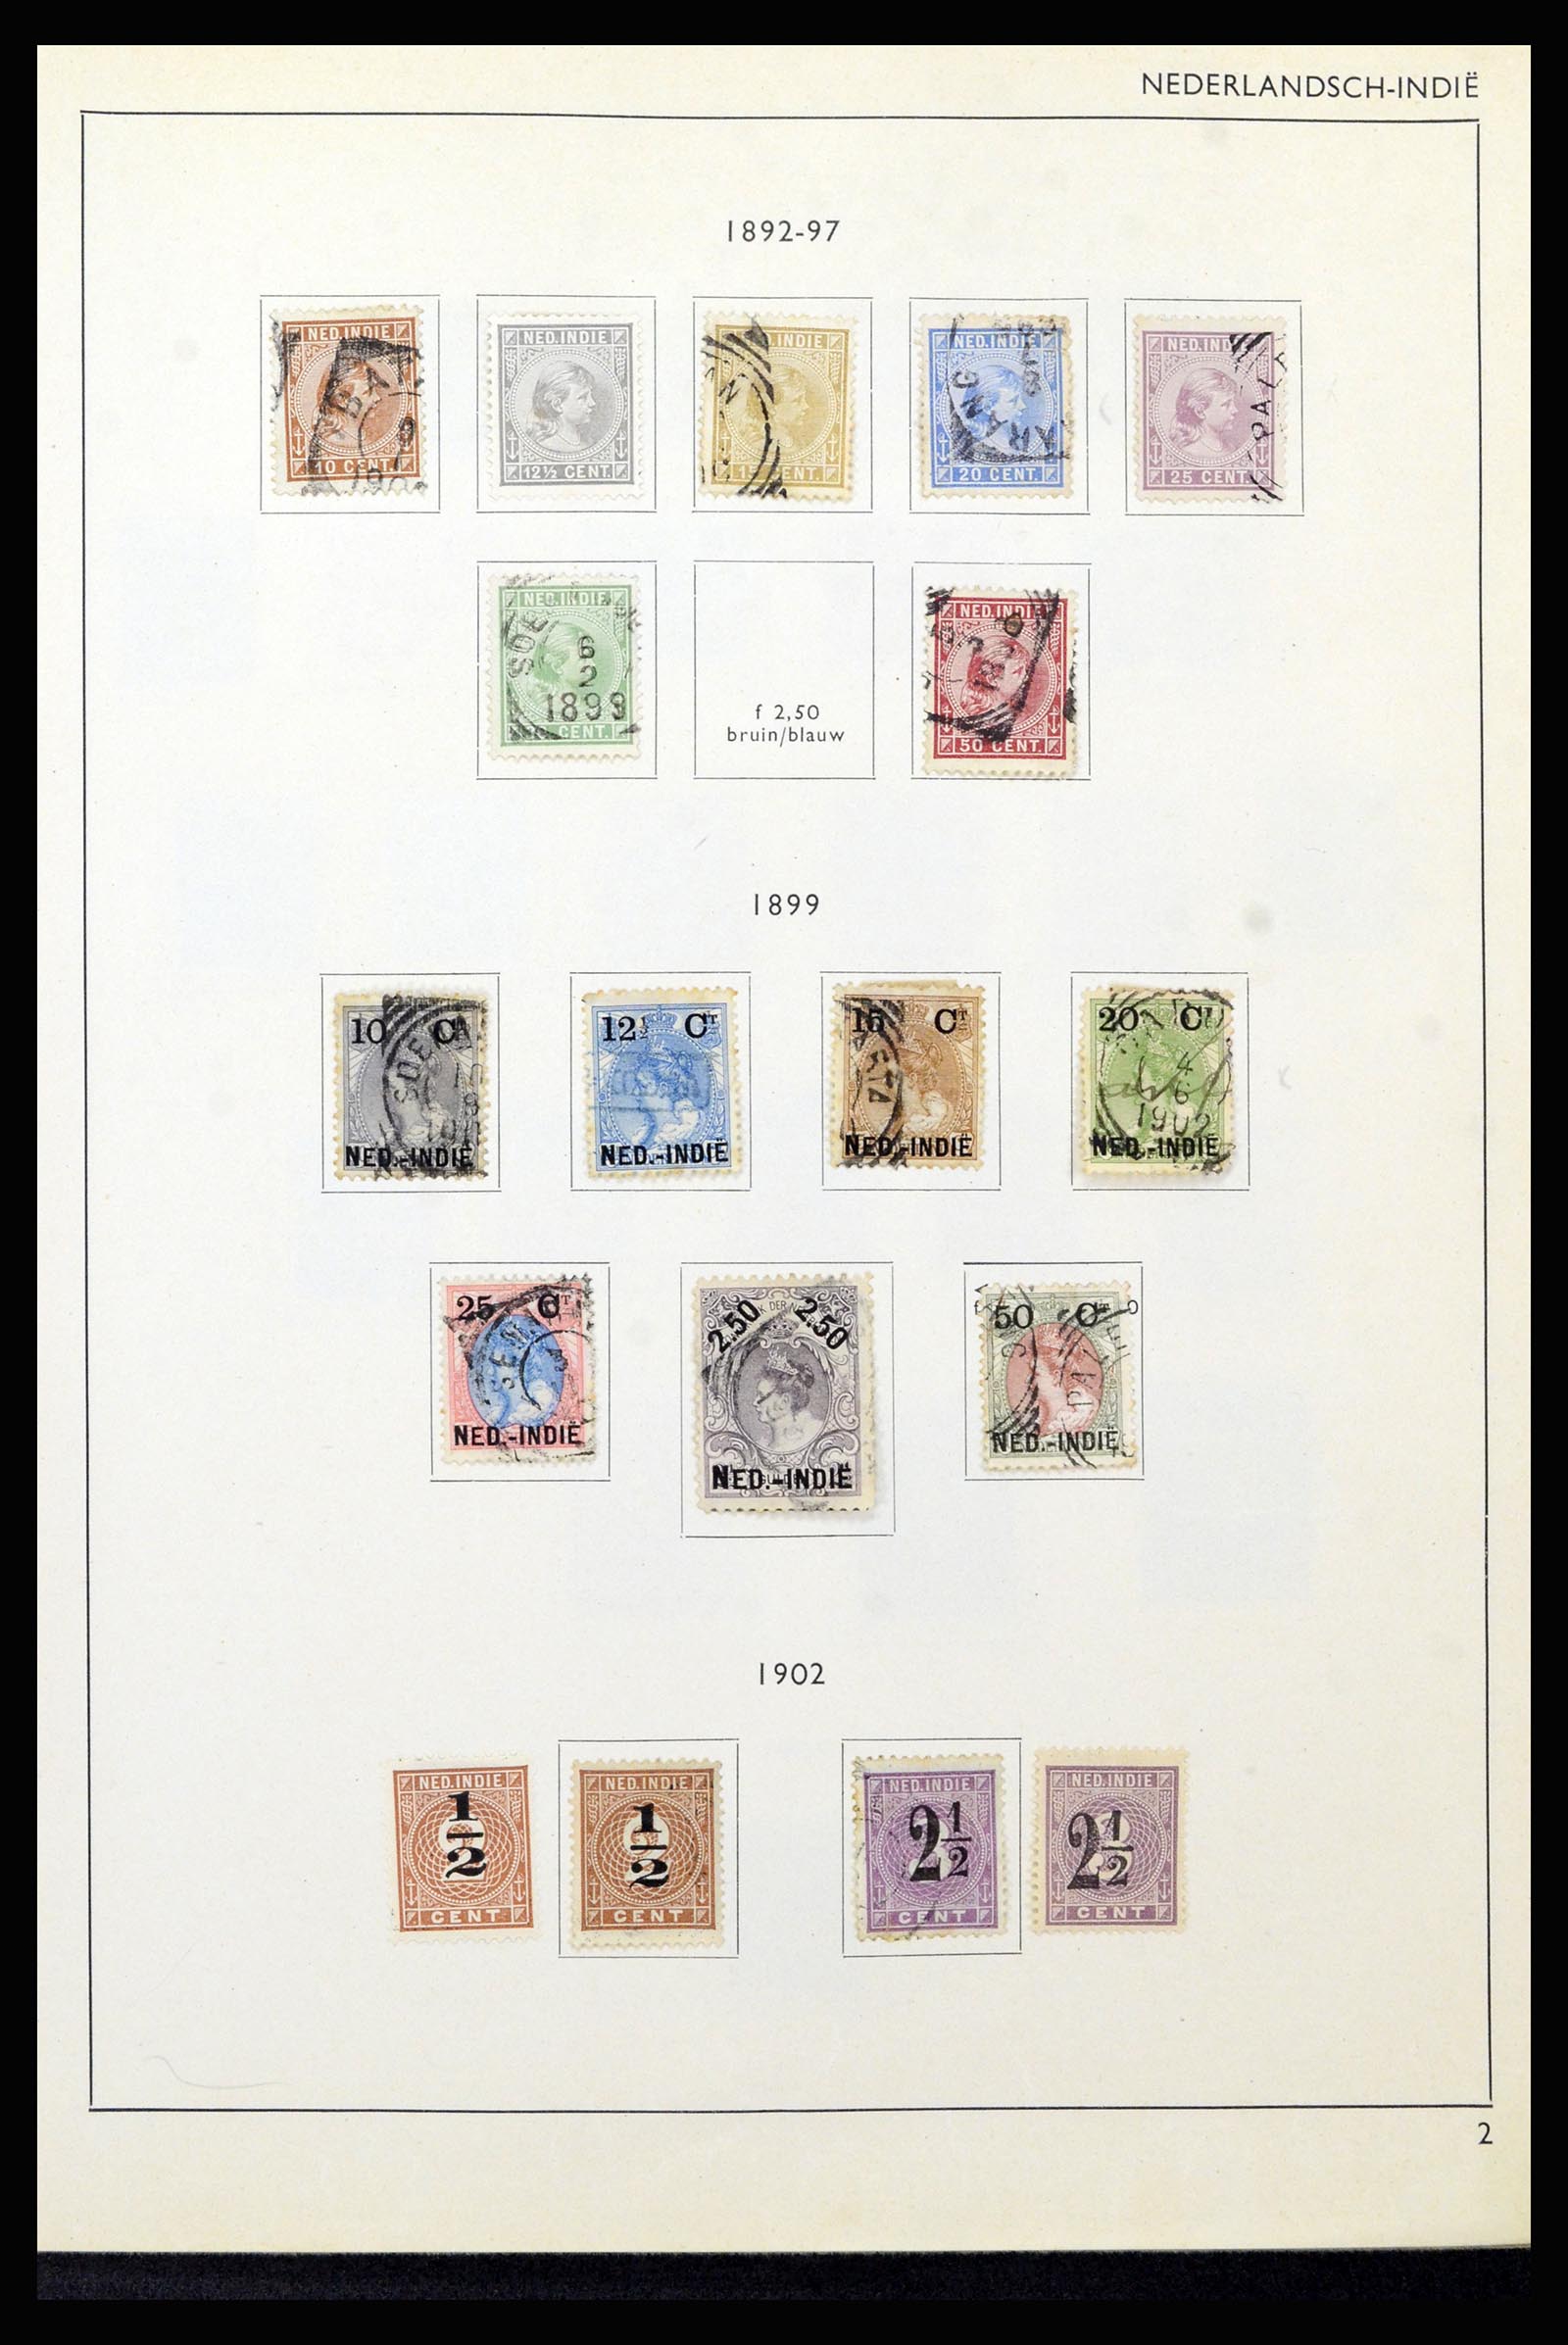 37217 002 - Stamp collection 37217 Dutch territories 1864-1975.